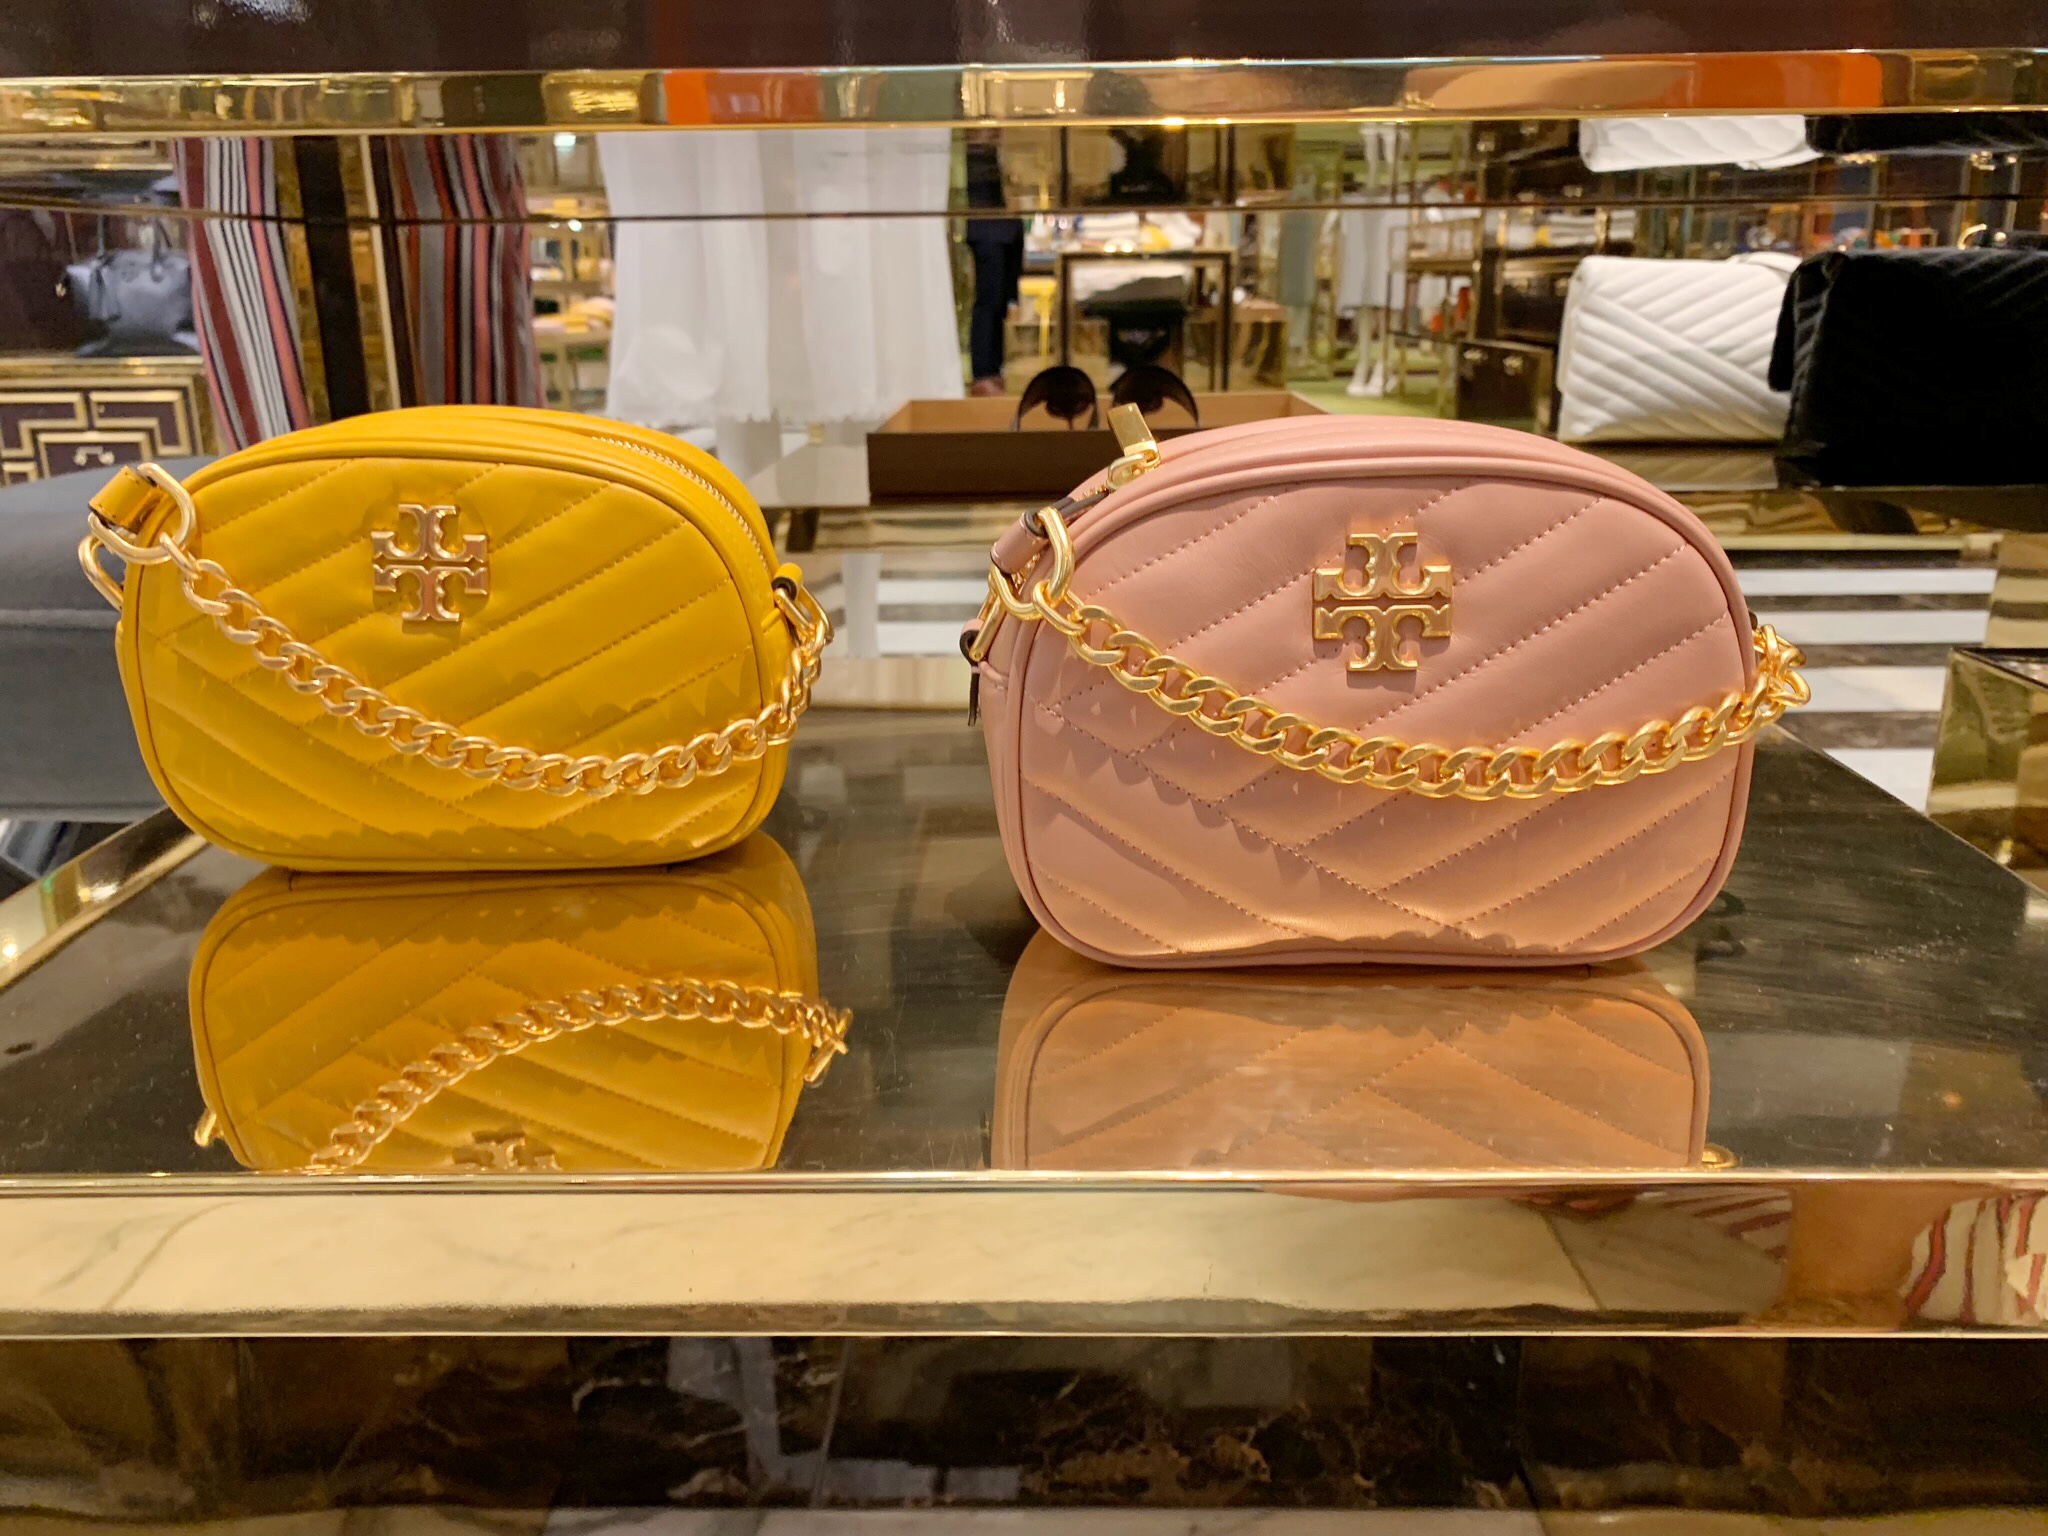 Tory Burch Spring Event 2019  Save Up To 30% Off! - The Double